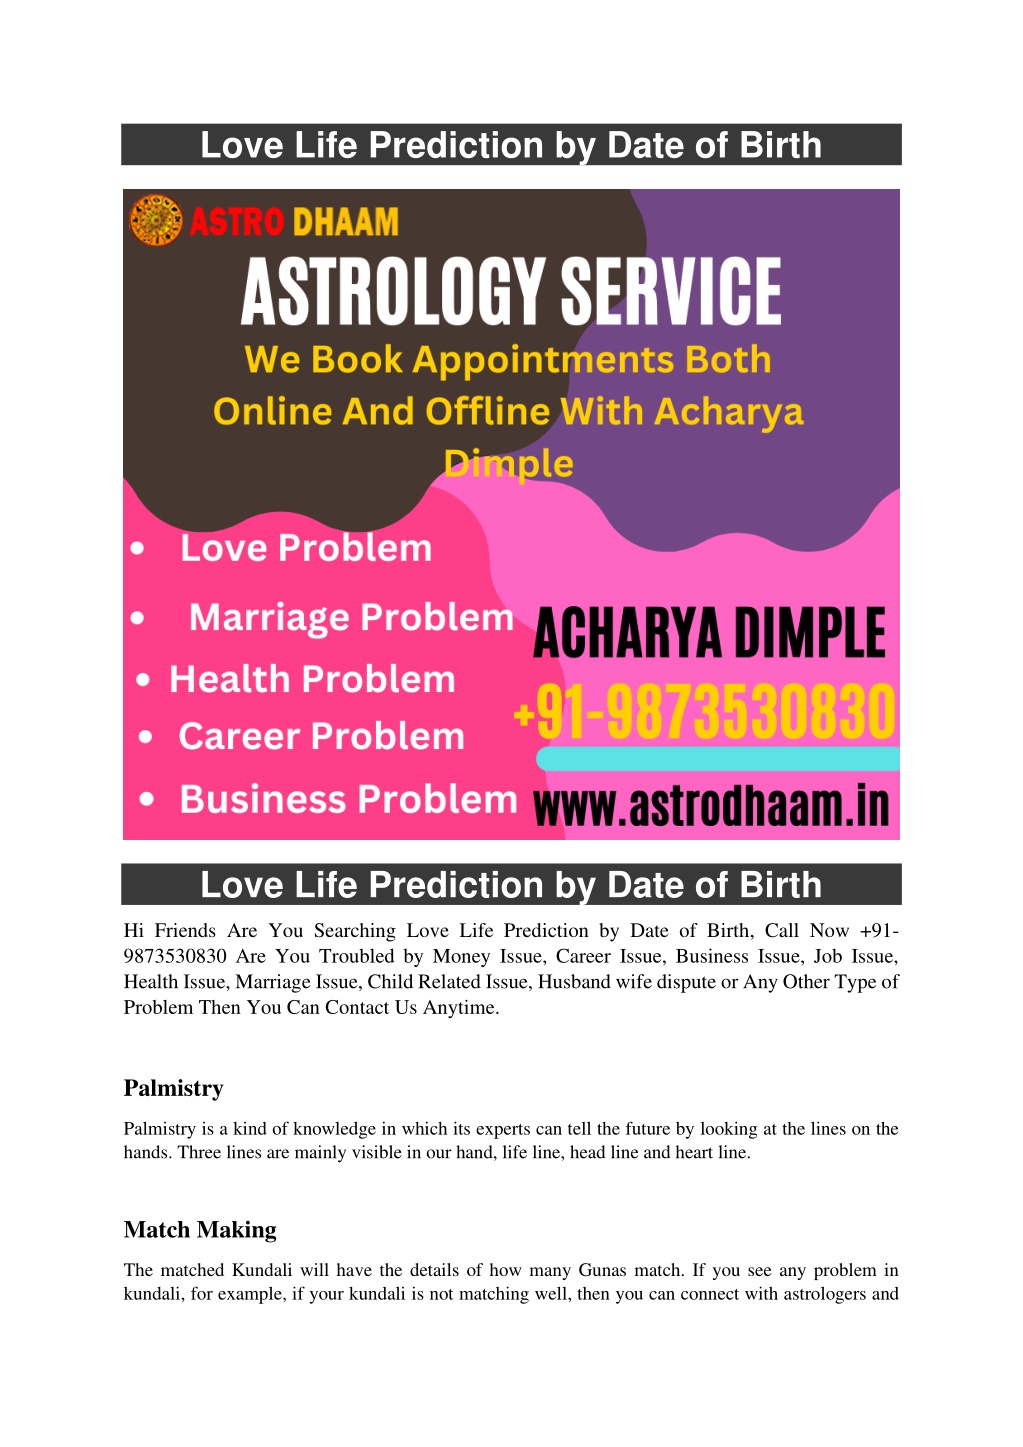 PPT Love Life Prediction by Date of Birth 919873530830 PowerPoint